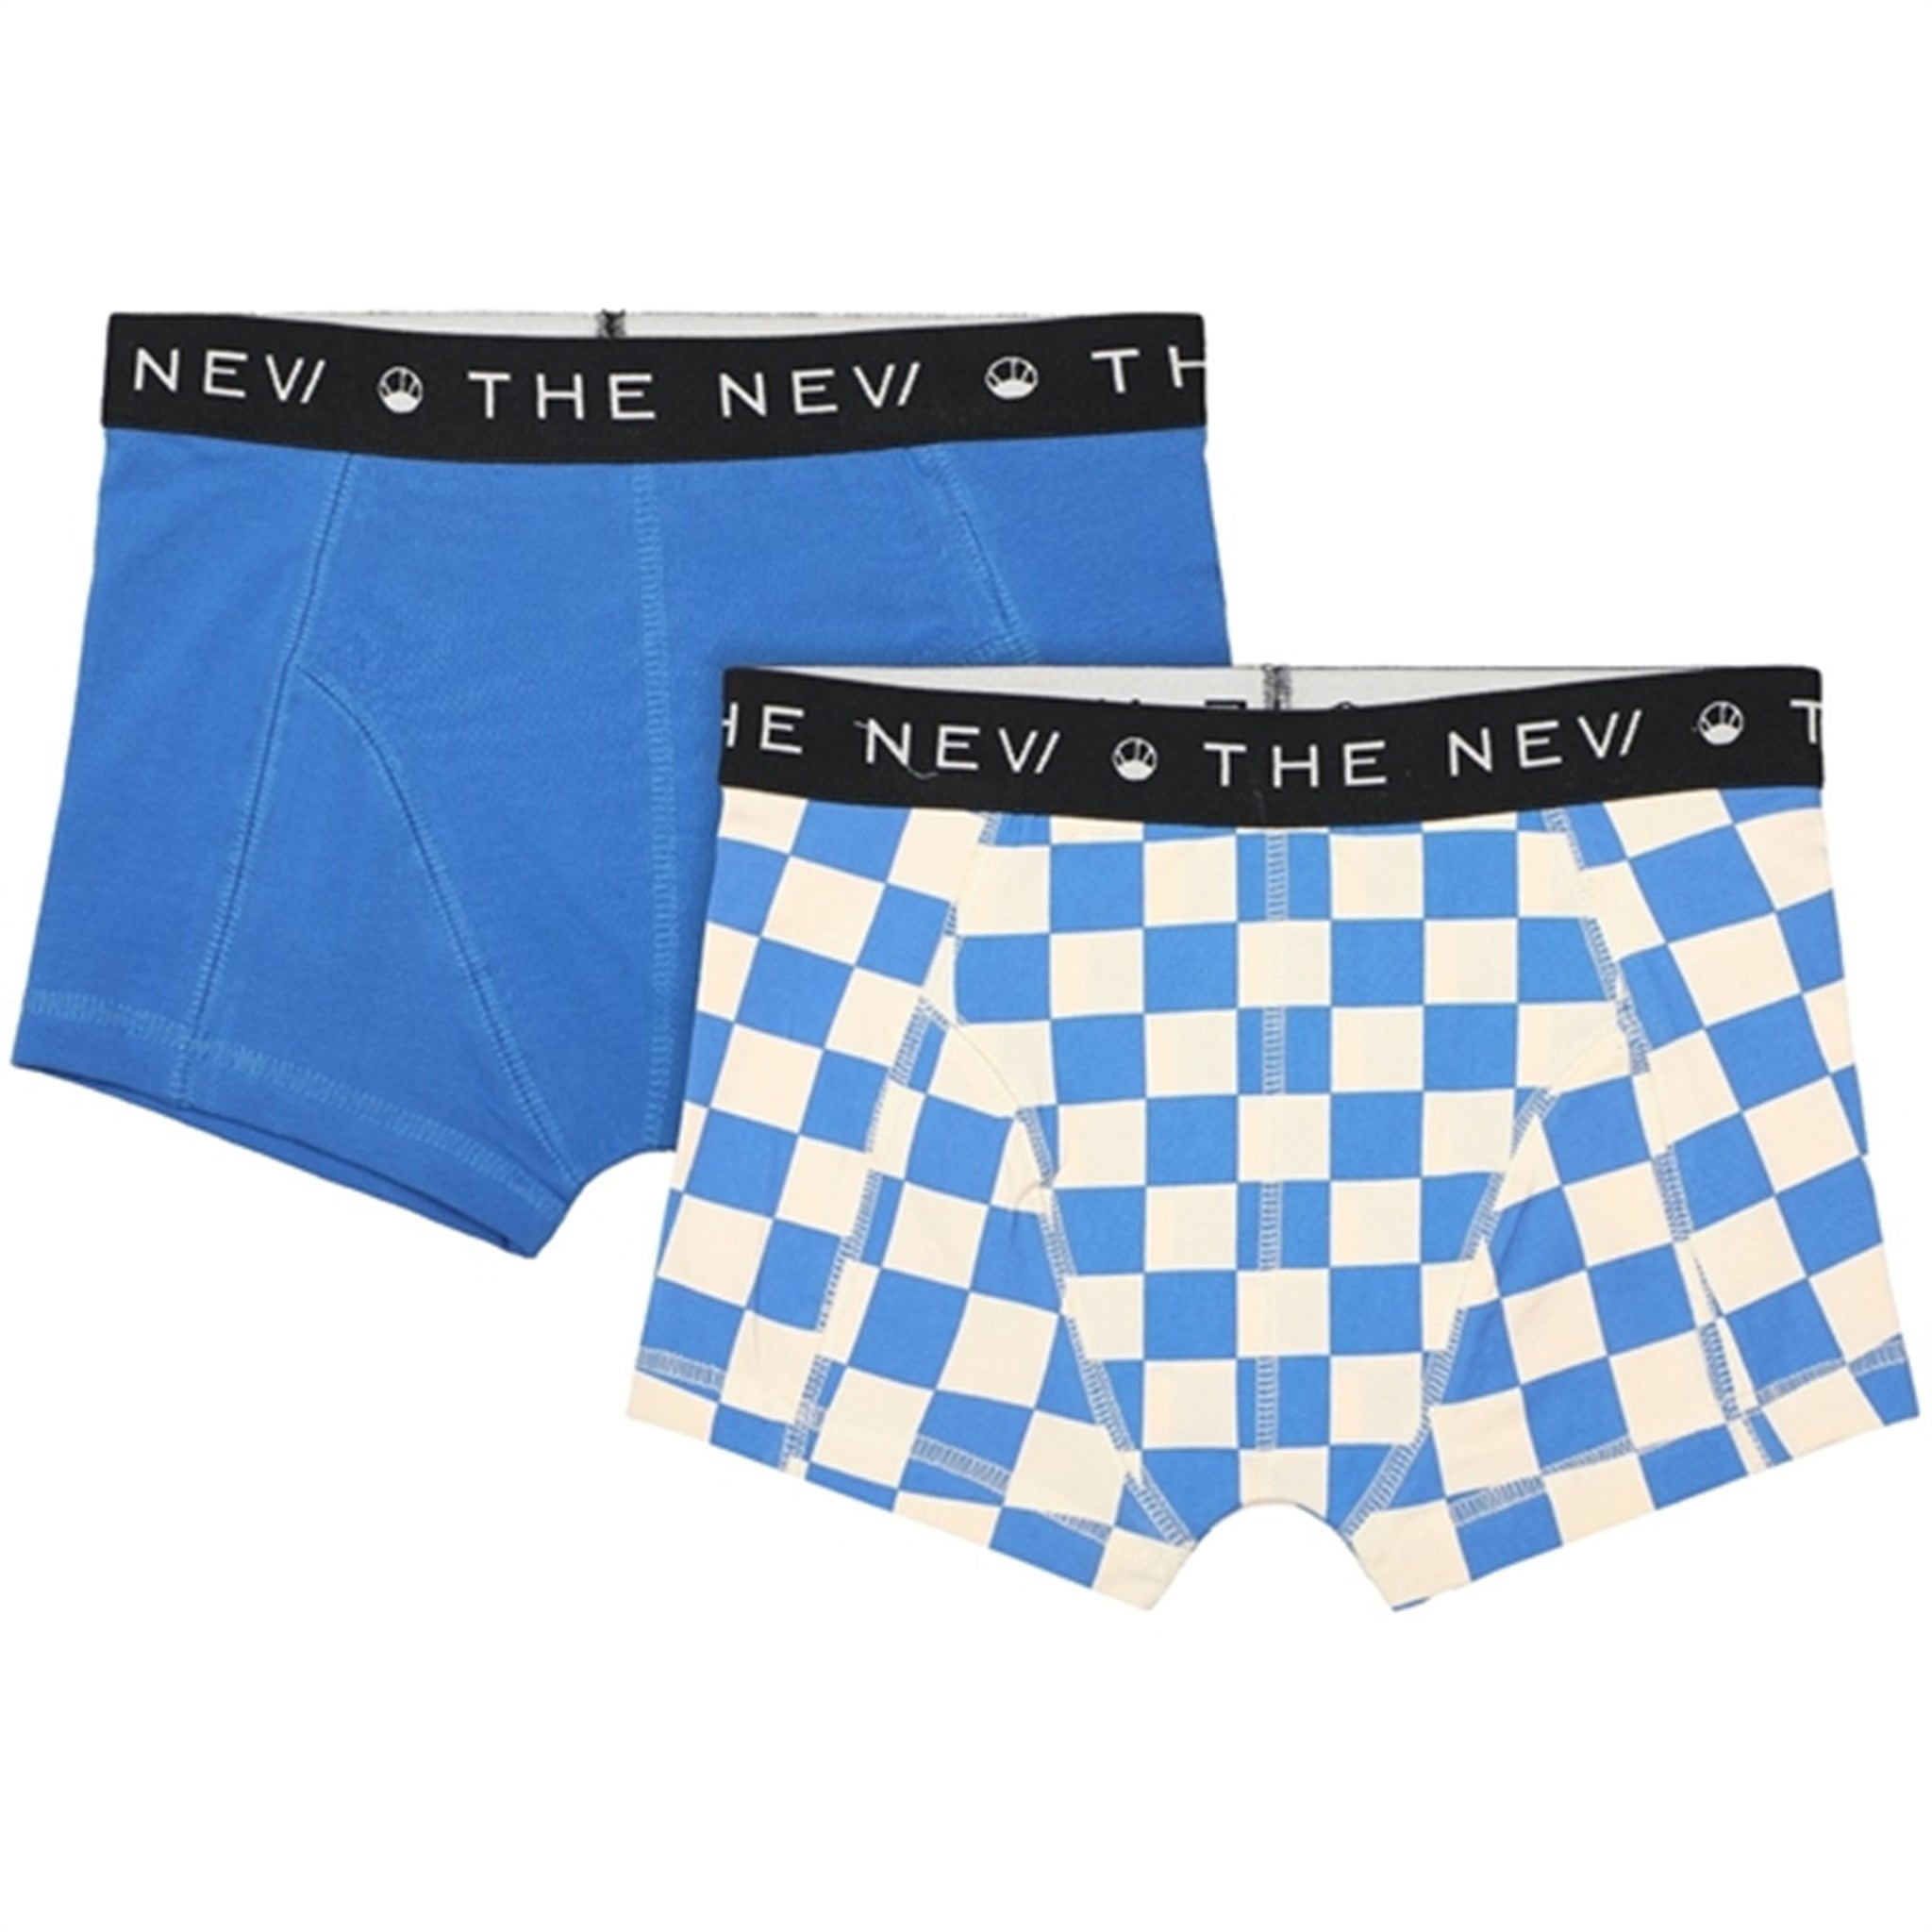 The New Strong Blue Boxers 2-Pack